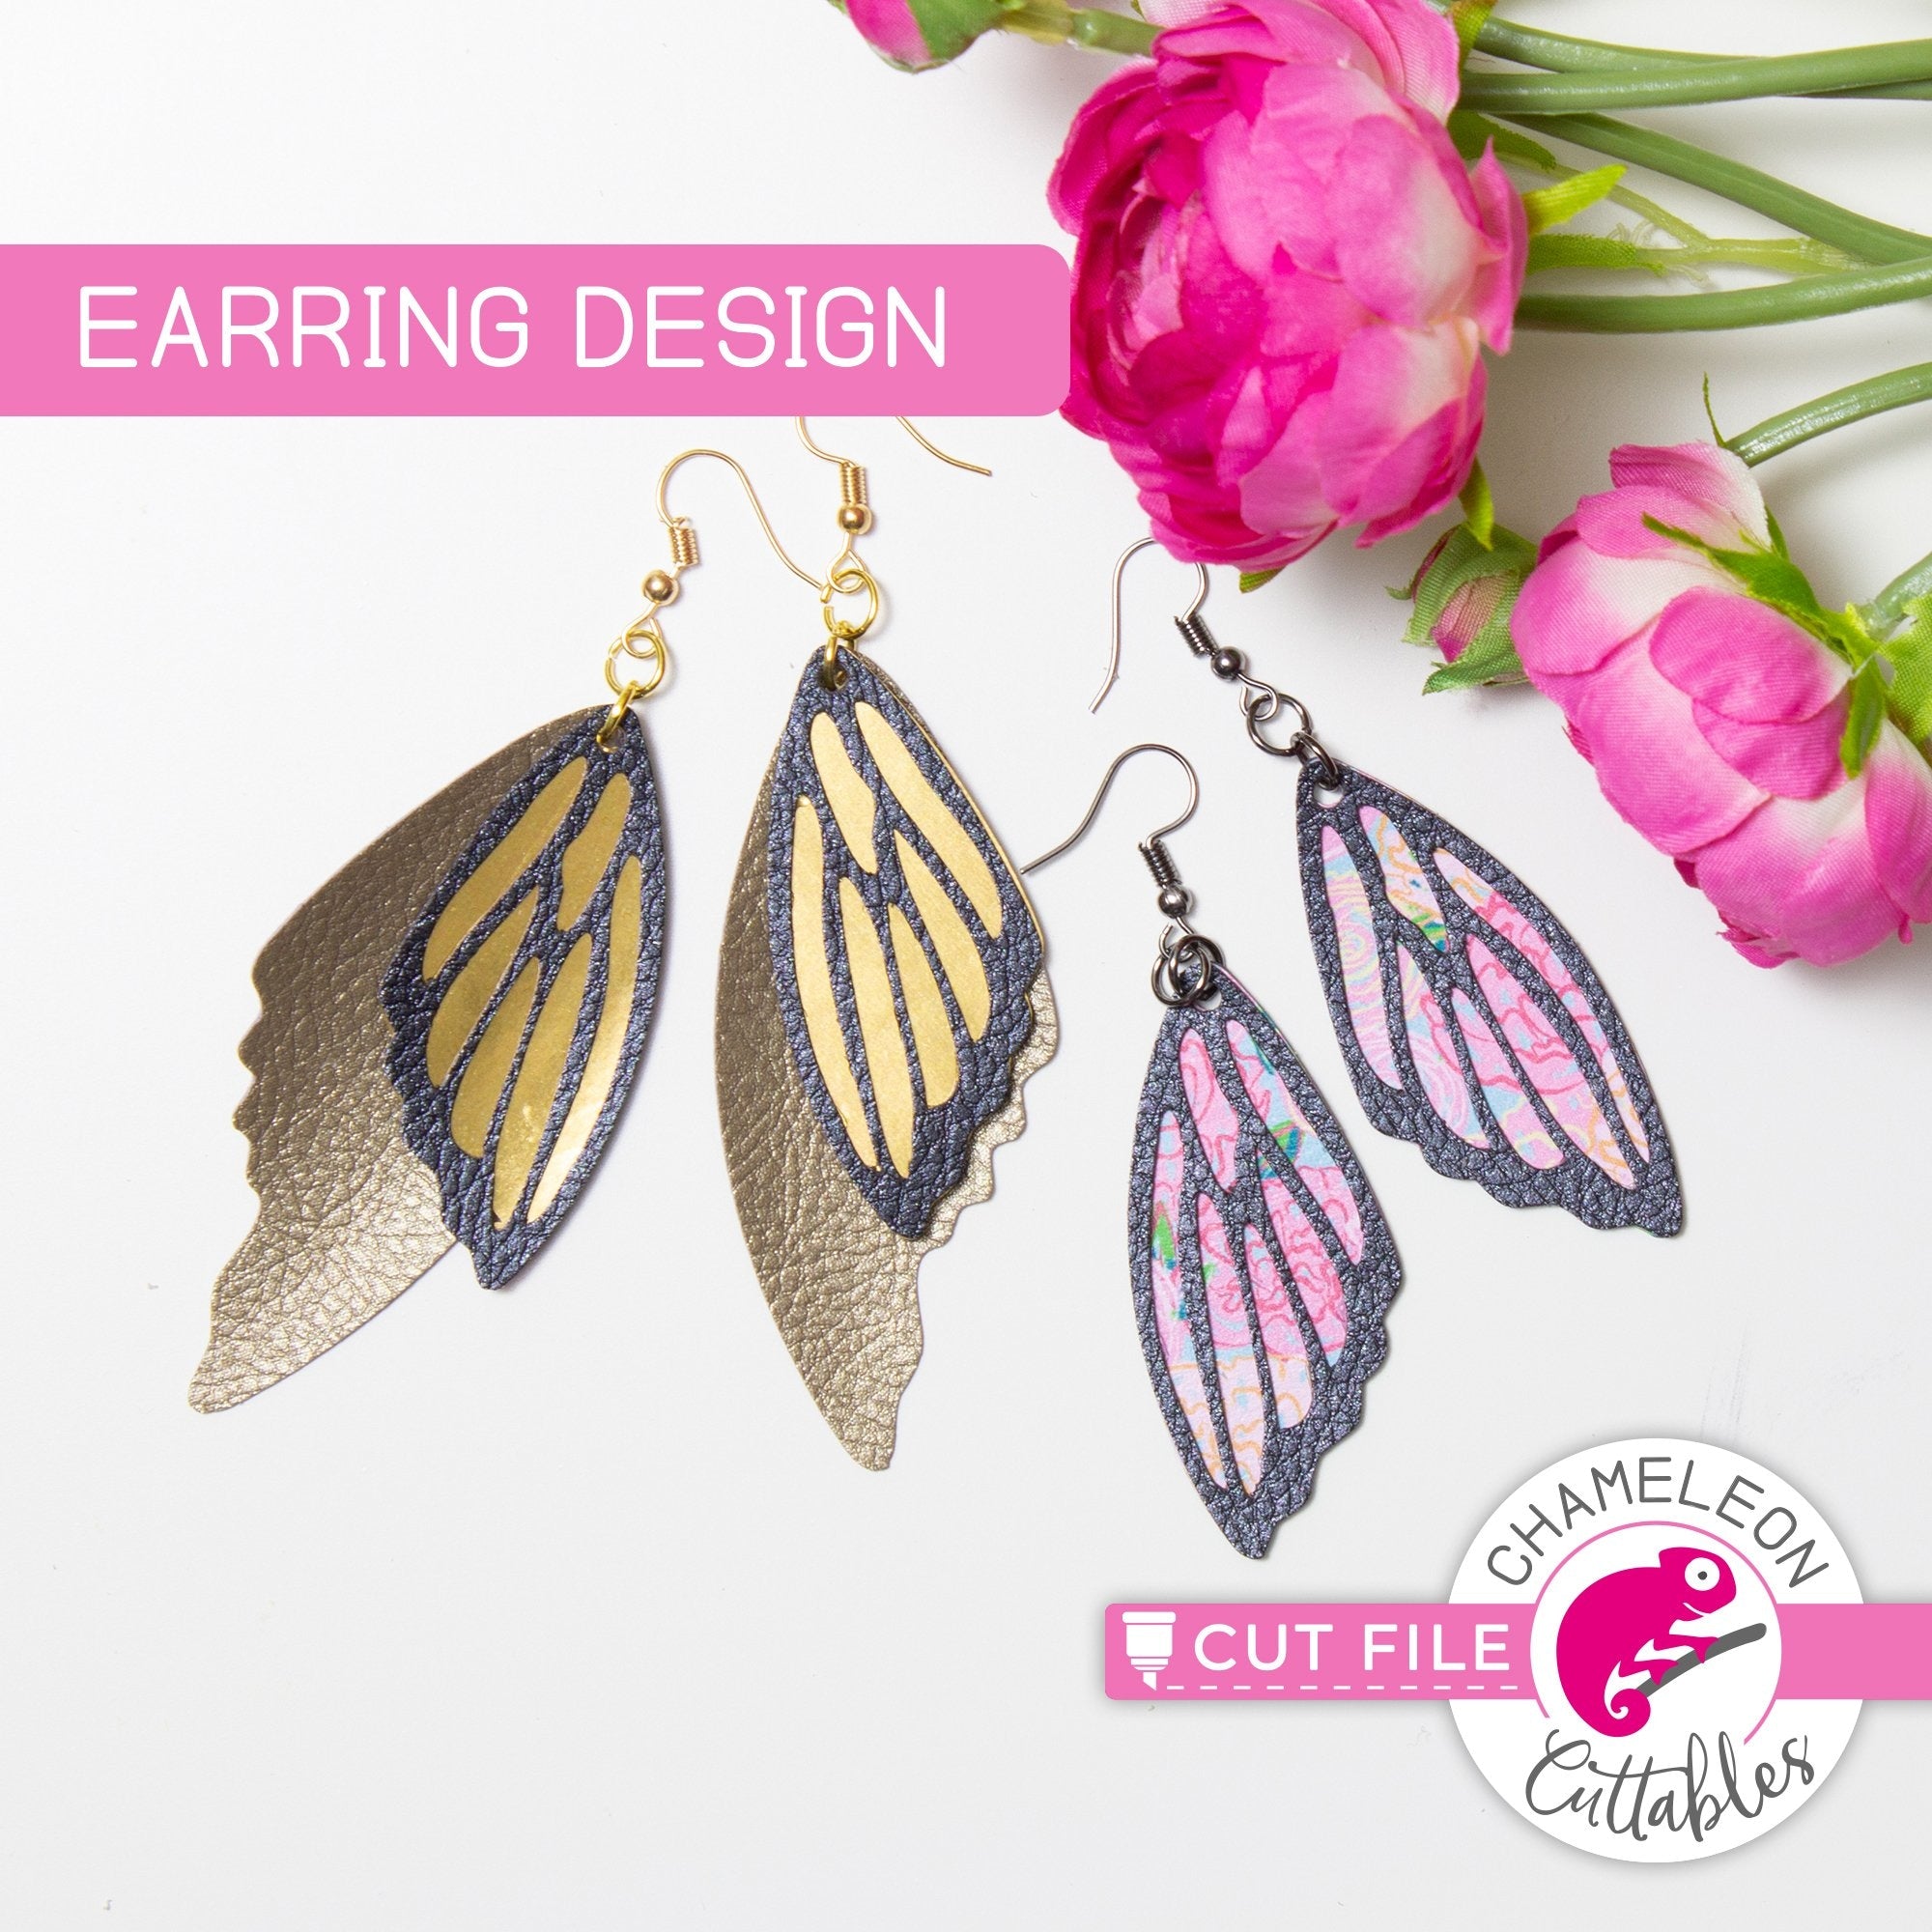 Butterfly Wings Earring Template Svg Png Dxf Eps Chameleon Cuttables Llc Chameleon Cuttables Llc